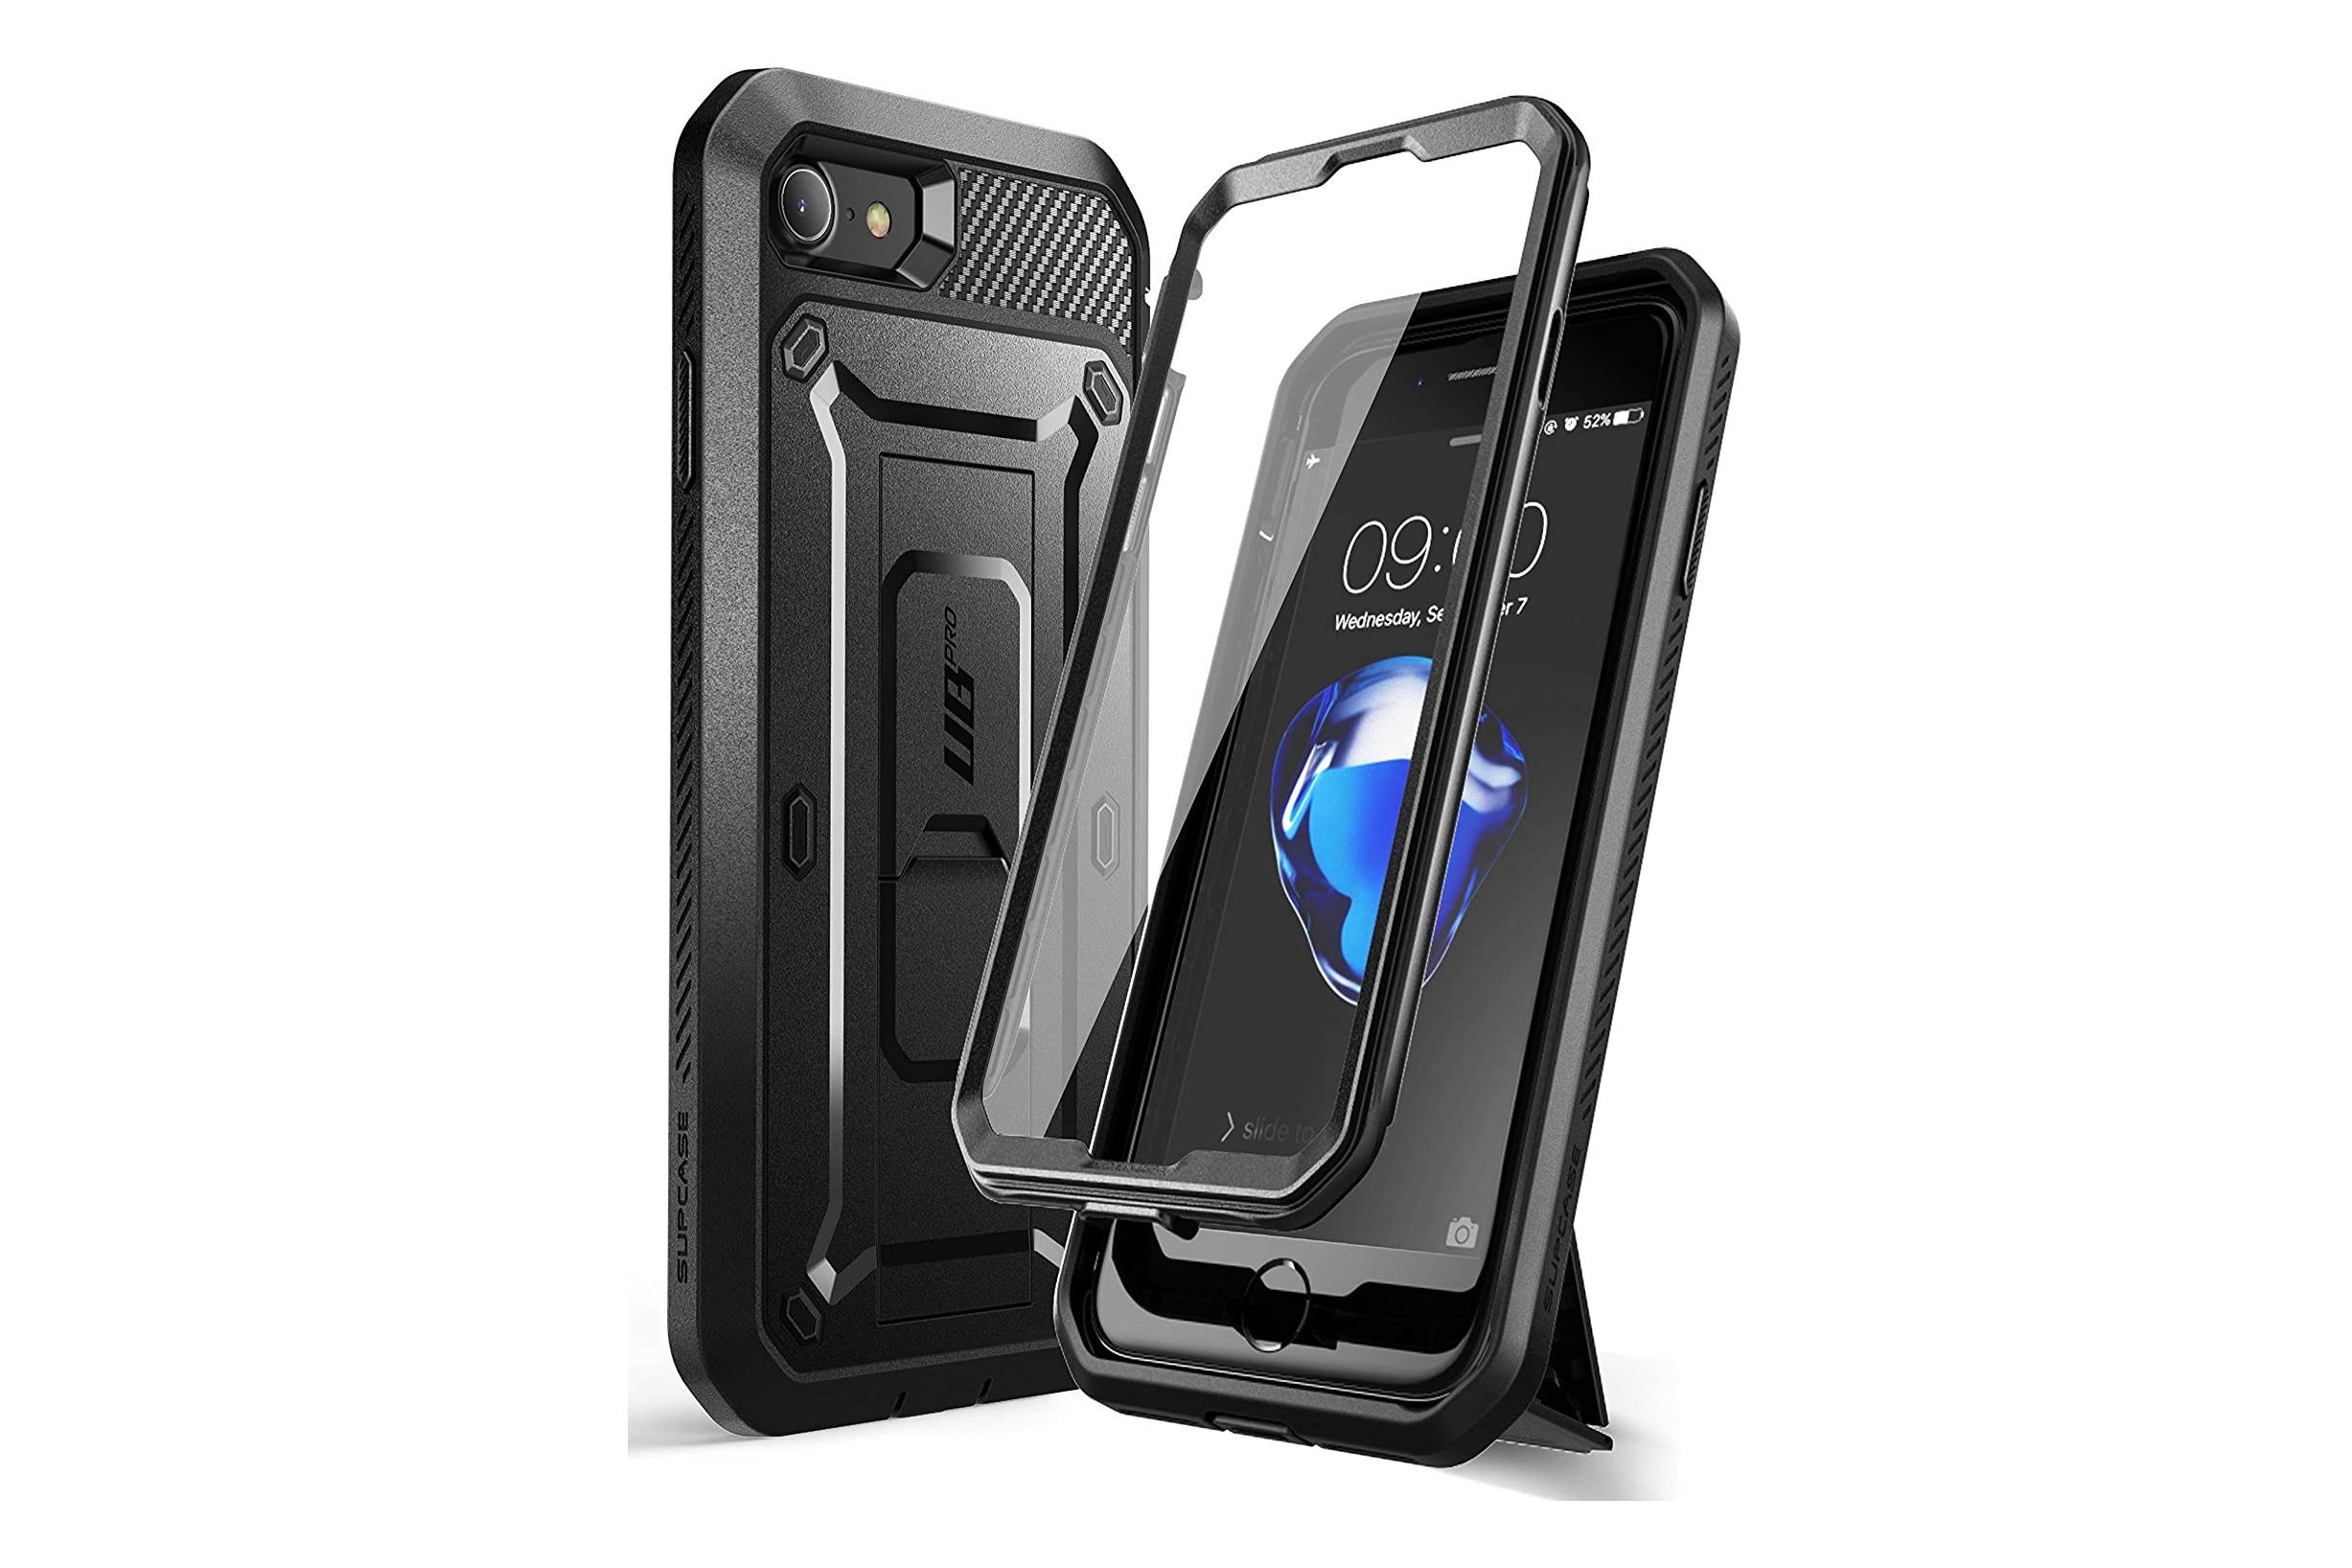 Rugged Military Grade Hard Vanguard Armor Cover Heavy Duty Shockproof Protective Phone Case 4.7 Inch MOBOSI Compatible with iPhone SE 2022 Case/iPhone SE 2020/iPhone 8/7 Case Matte Black 